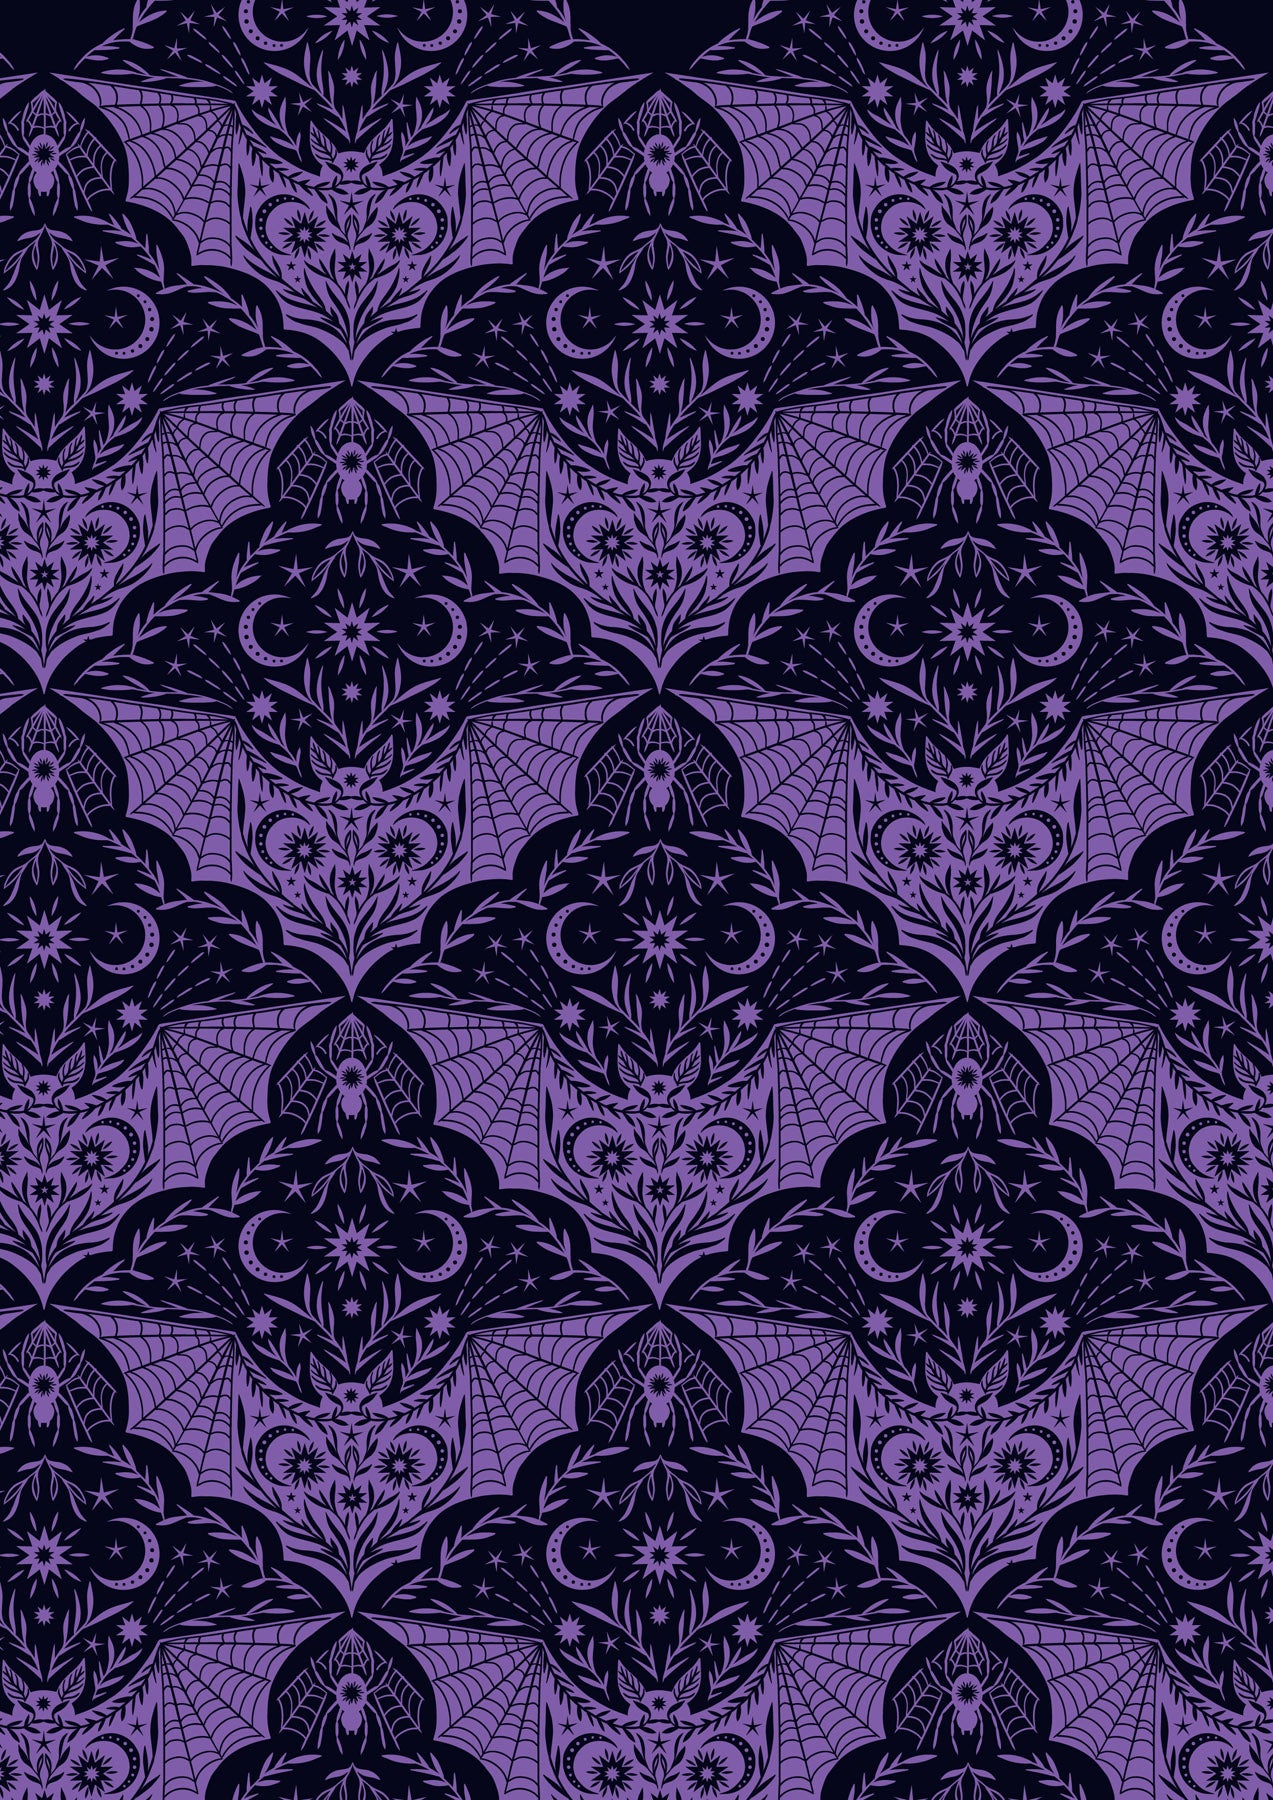 Cast A Spell - Lewis & Irene - Cast A Spell Purple Floral